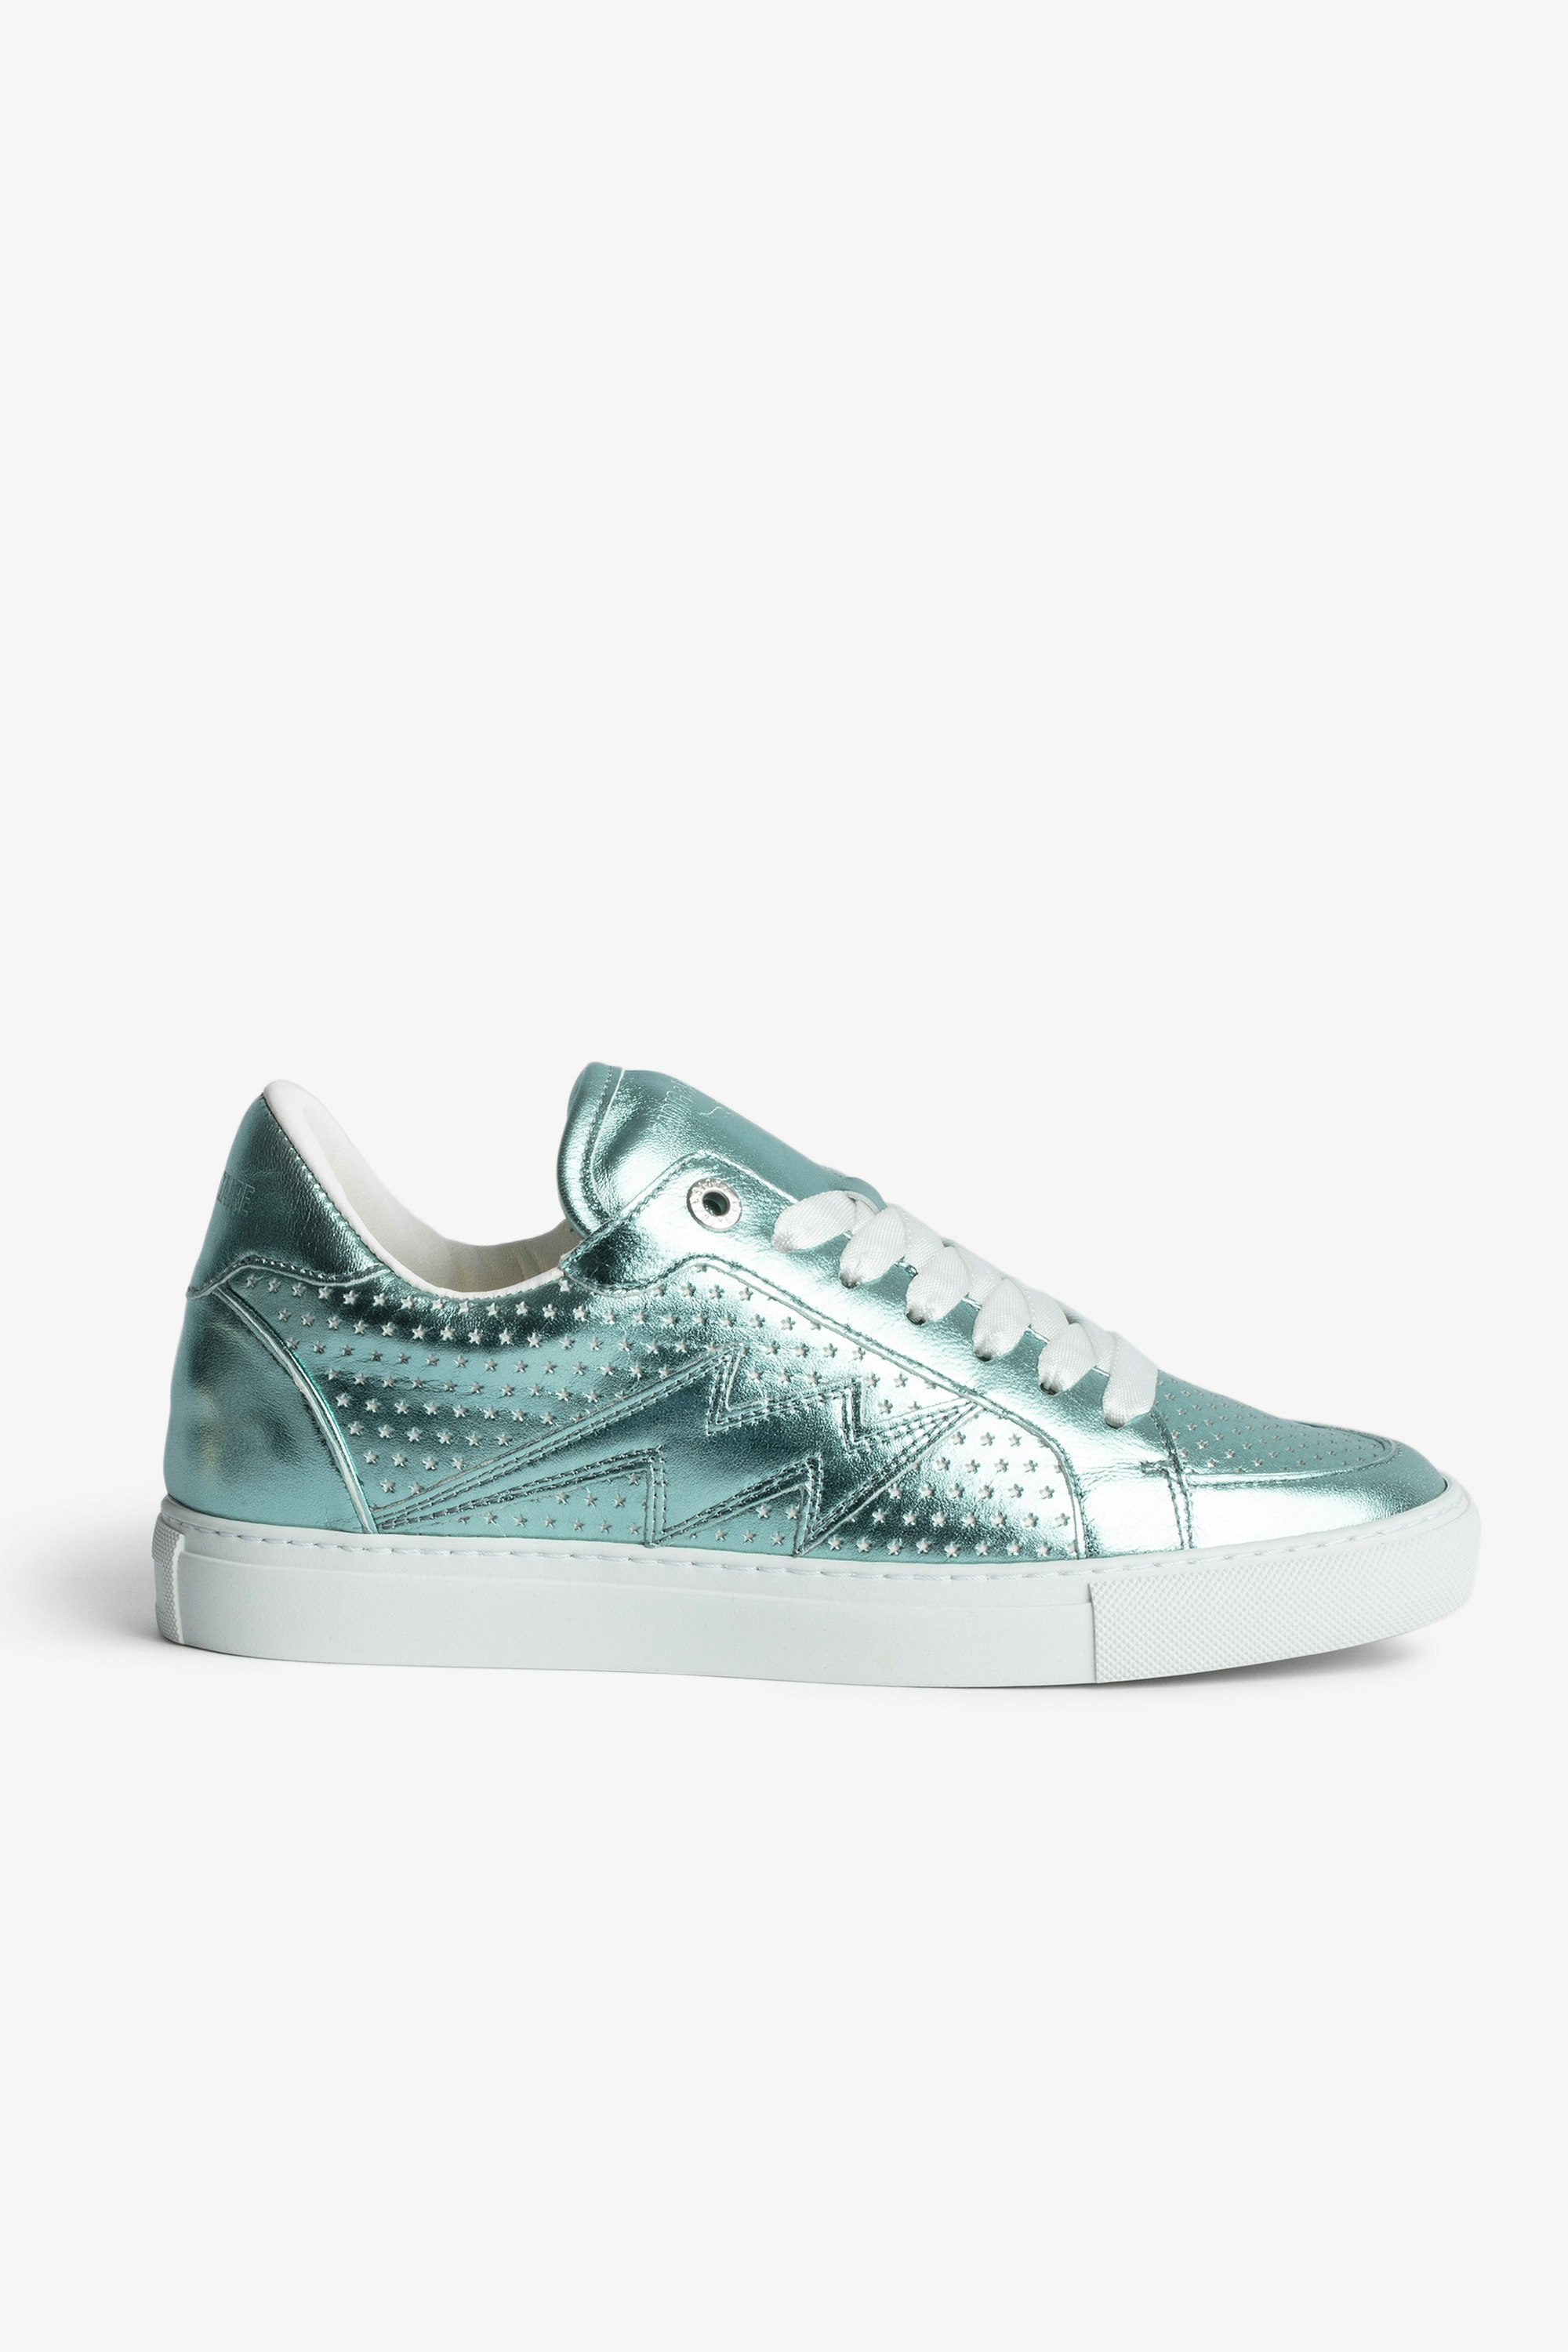 La Flash Trainers Women's low-top trainers in blue metallic leather with perforated stars